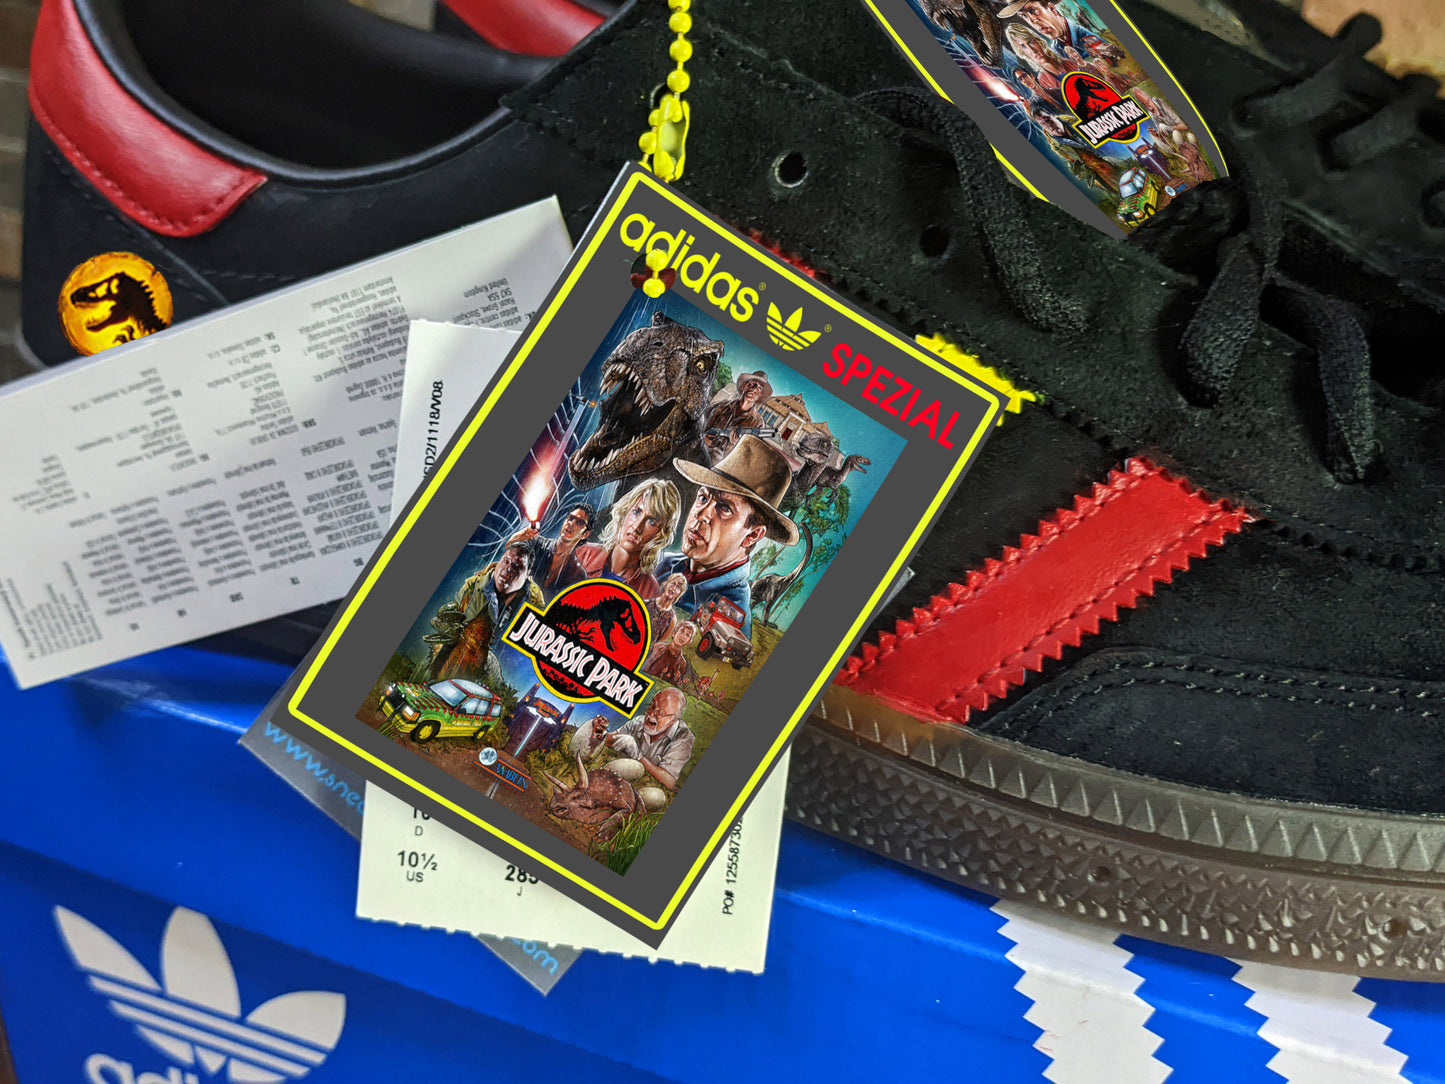 Limited edition Jurassic Park inspired black / red/ yellow Adidas custom Handball Spezial trainers / sneakers